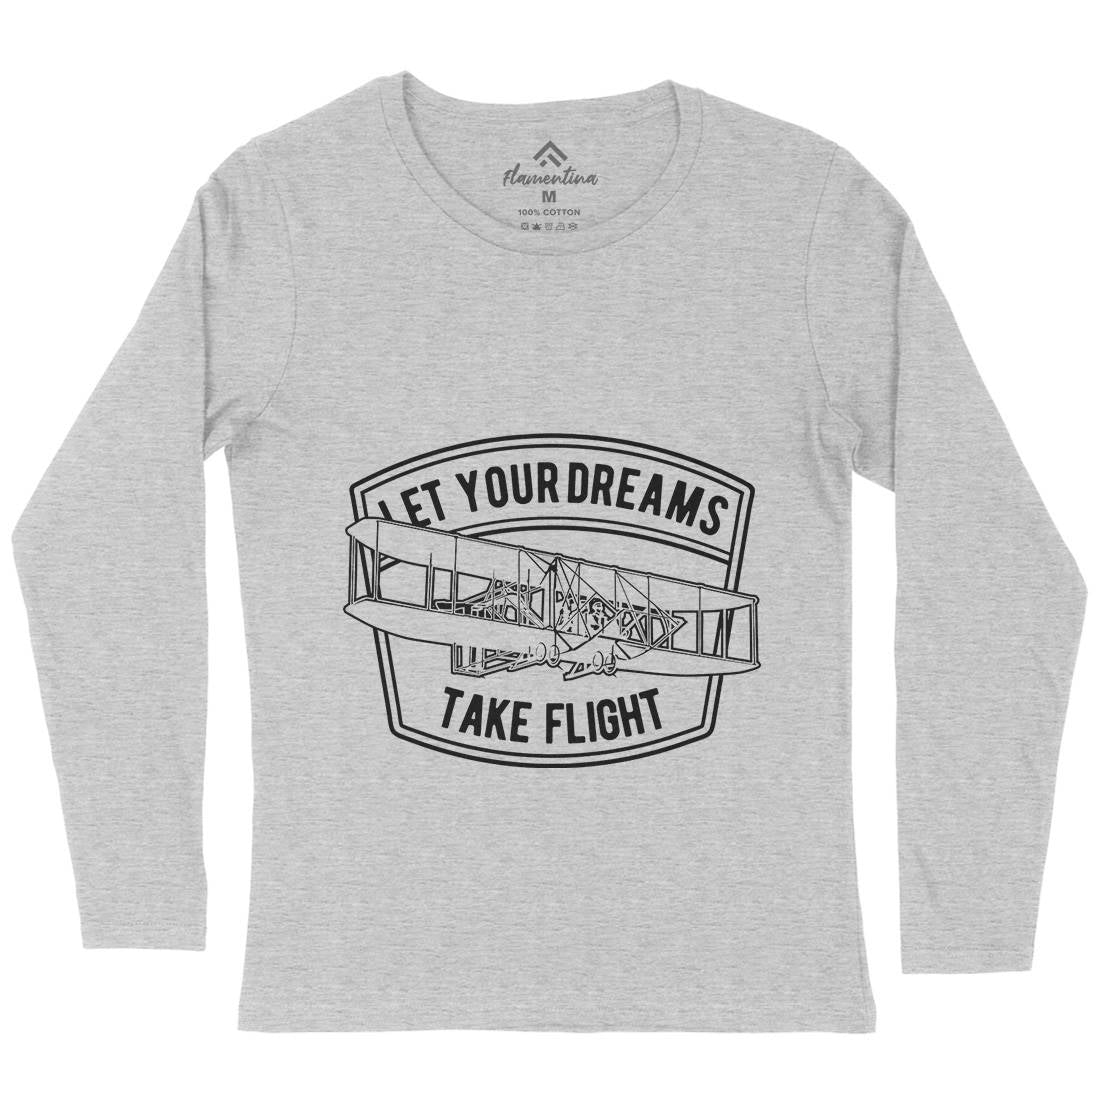 Let Your Dreams Womens Long Sleeve T-Shirt Vehicles A706